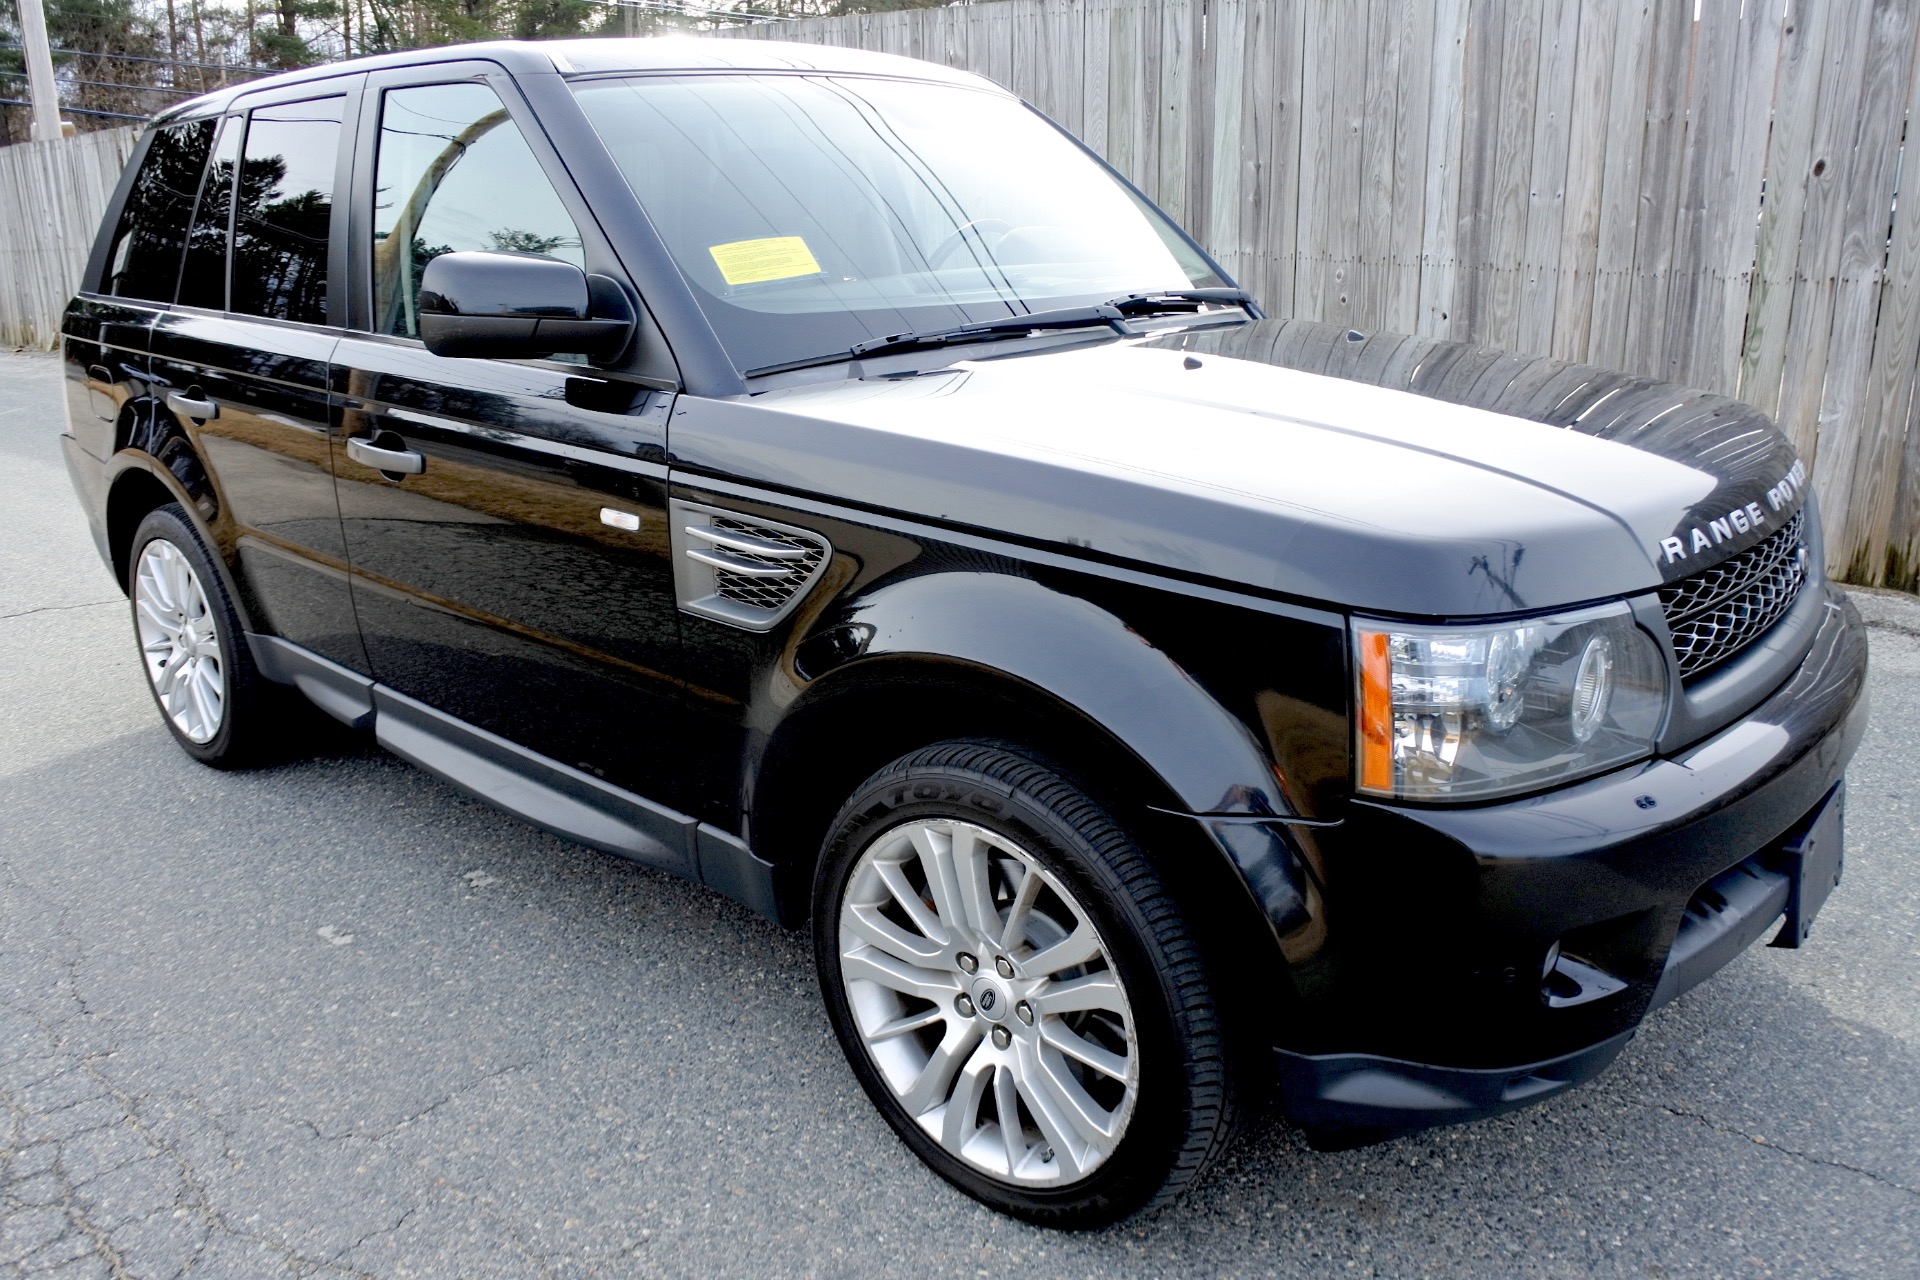 Used 2011 Land Rover Range Rover Sport HSE LUX For Sale 17 800 